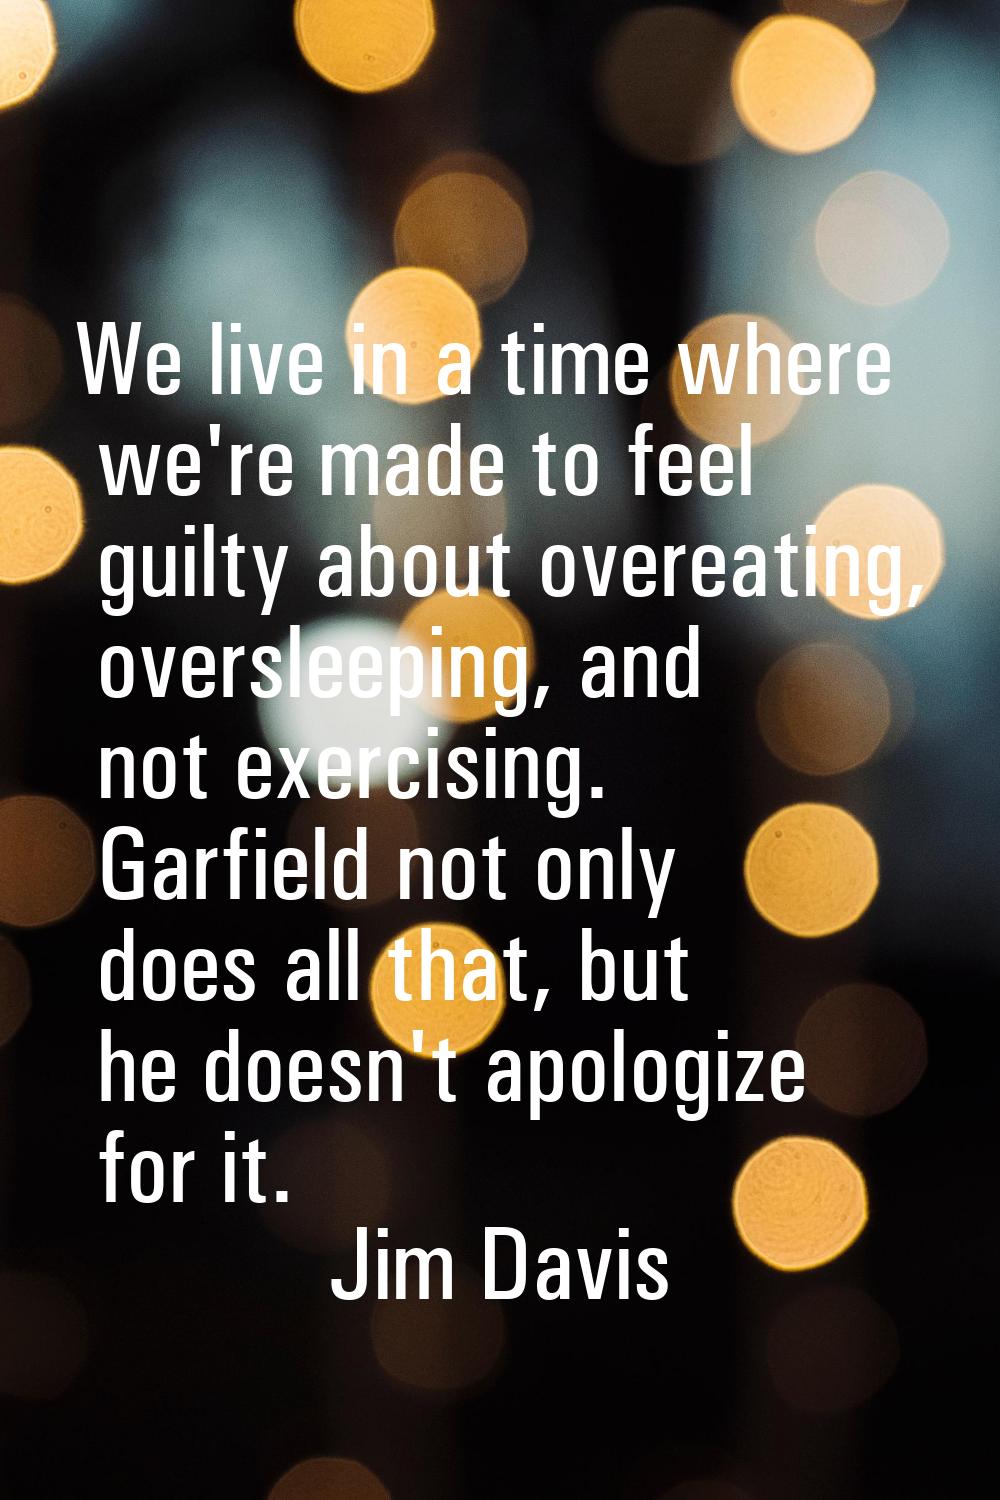 We live in a time where we're made to feel guilty about overeating, oversleeping, and not exercisin